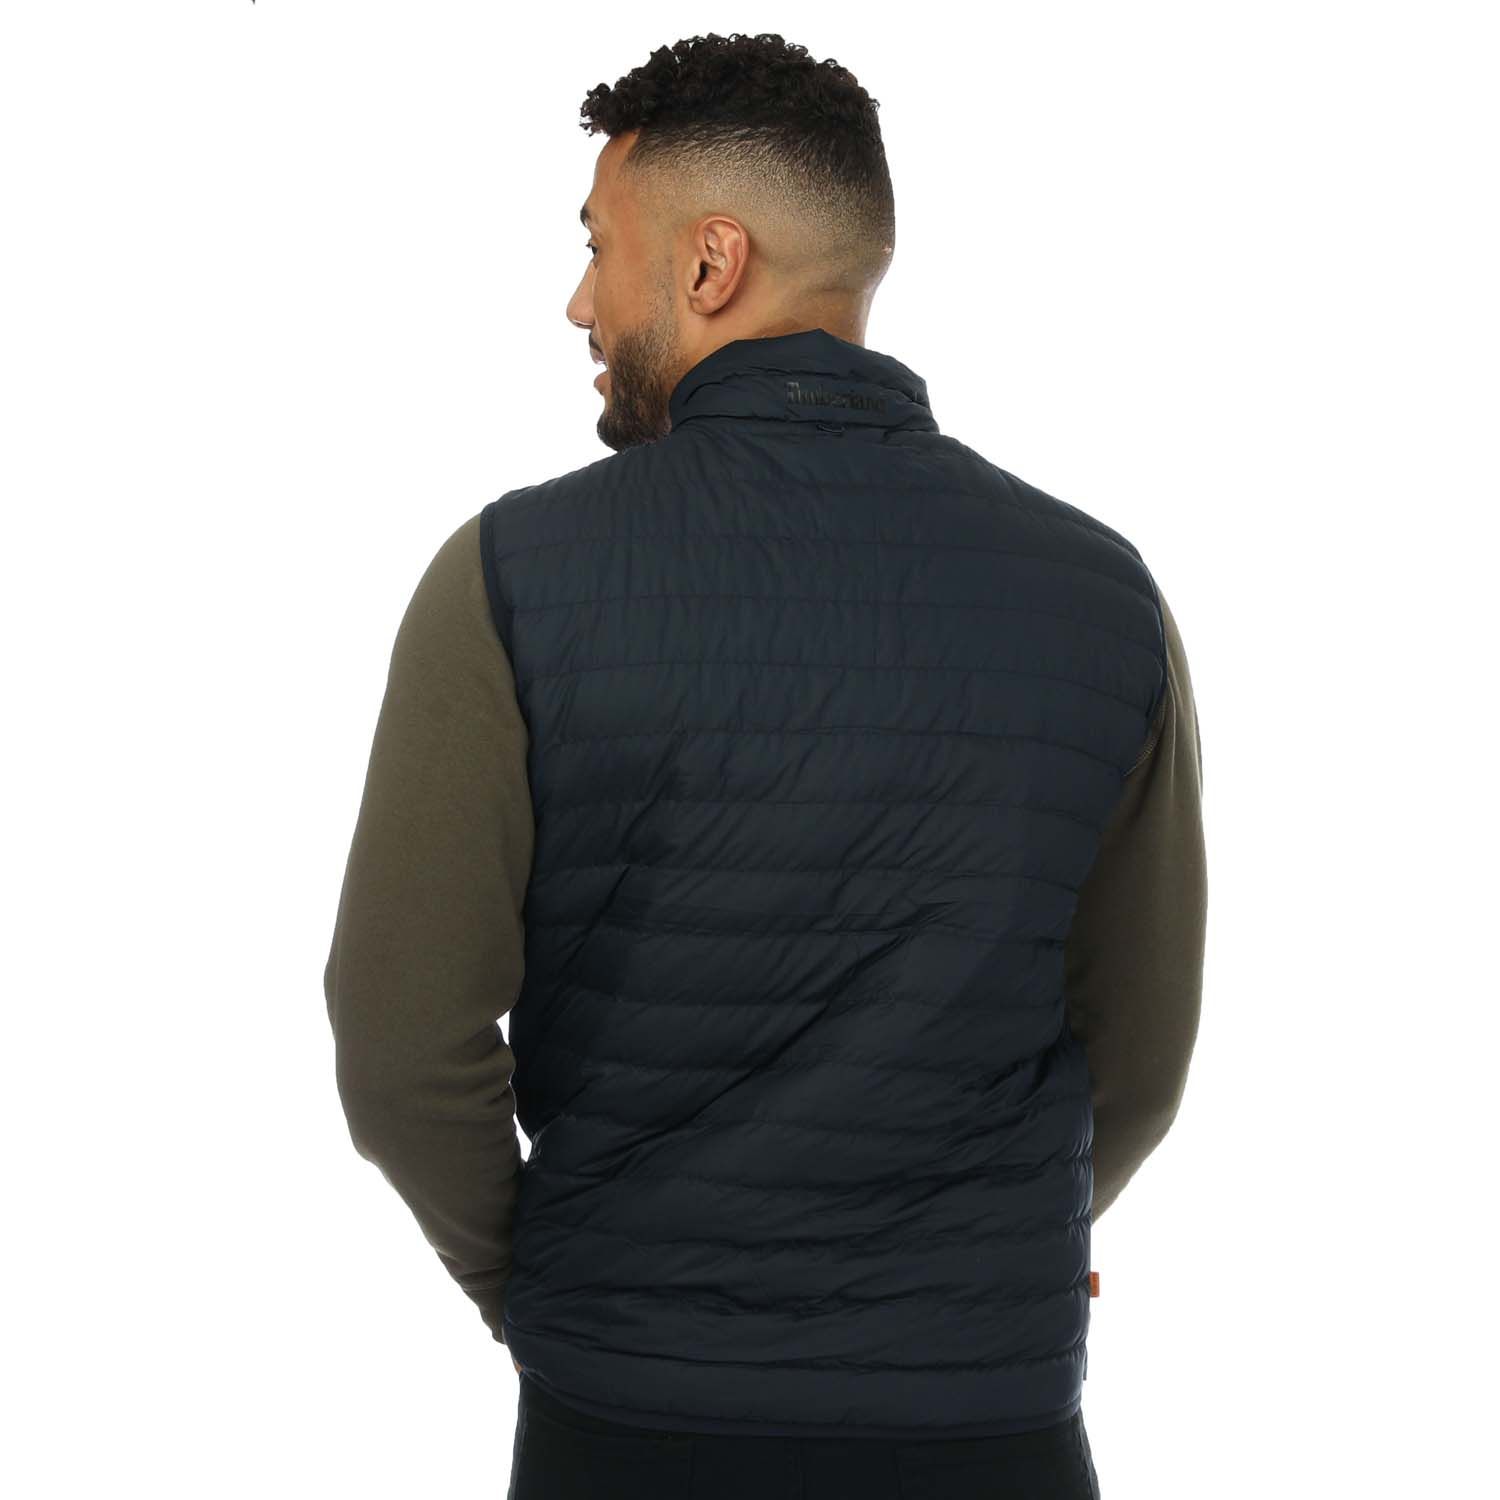 Navy Timberland Mens Axis Peak Thermal Vest - Get The Label